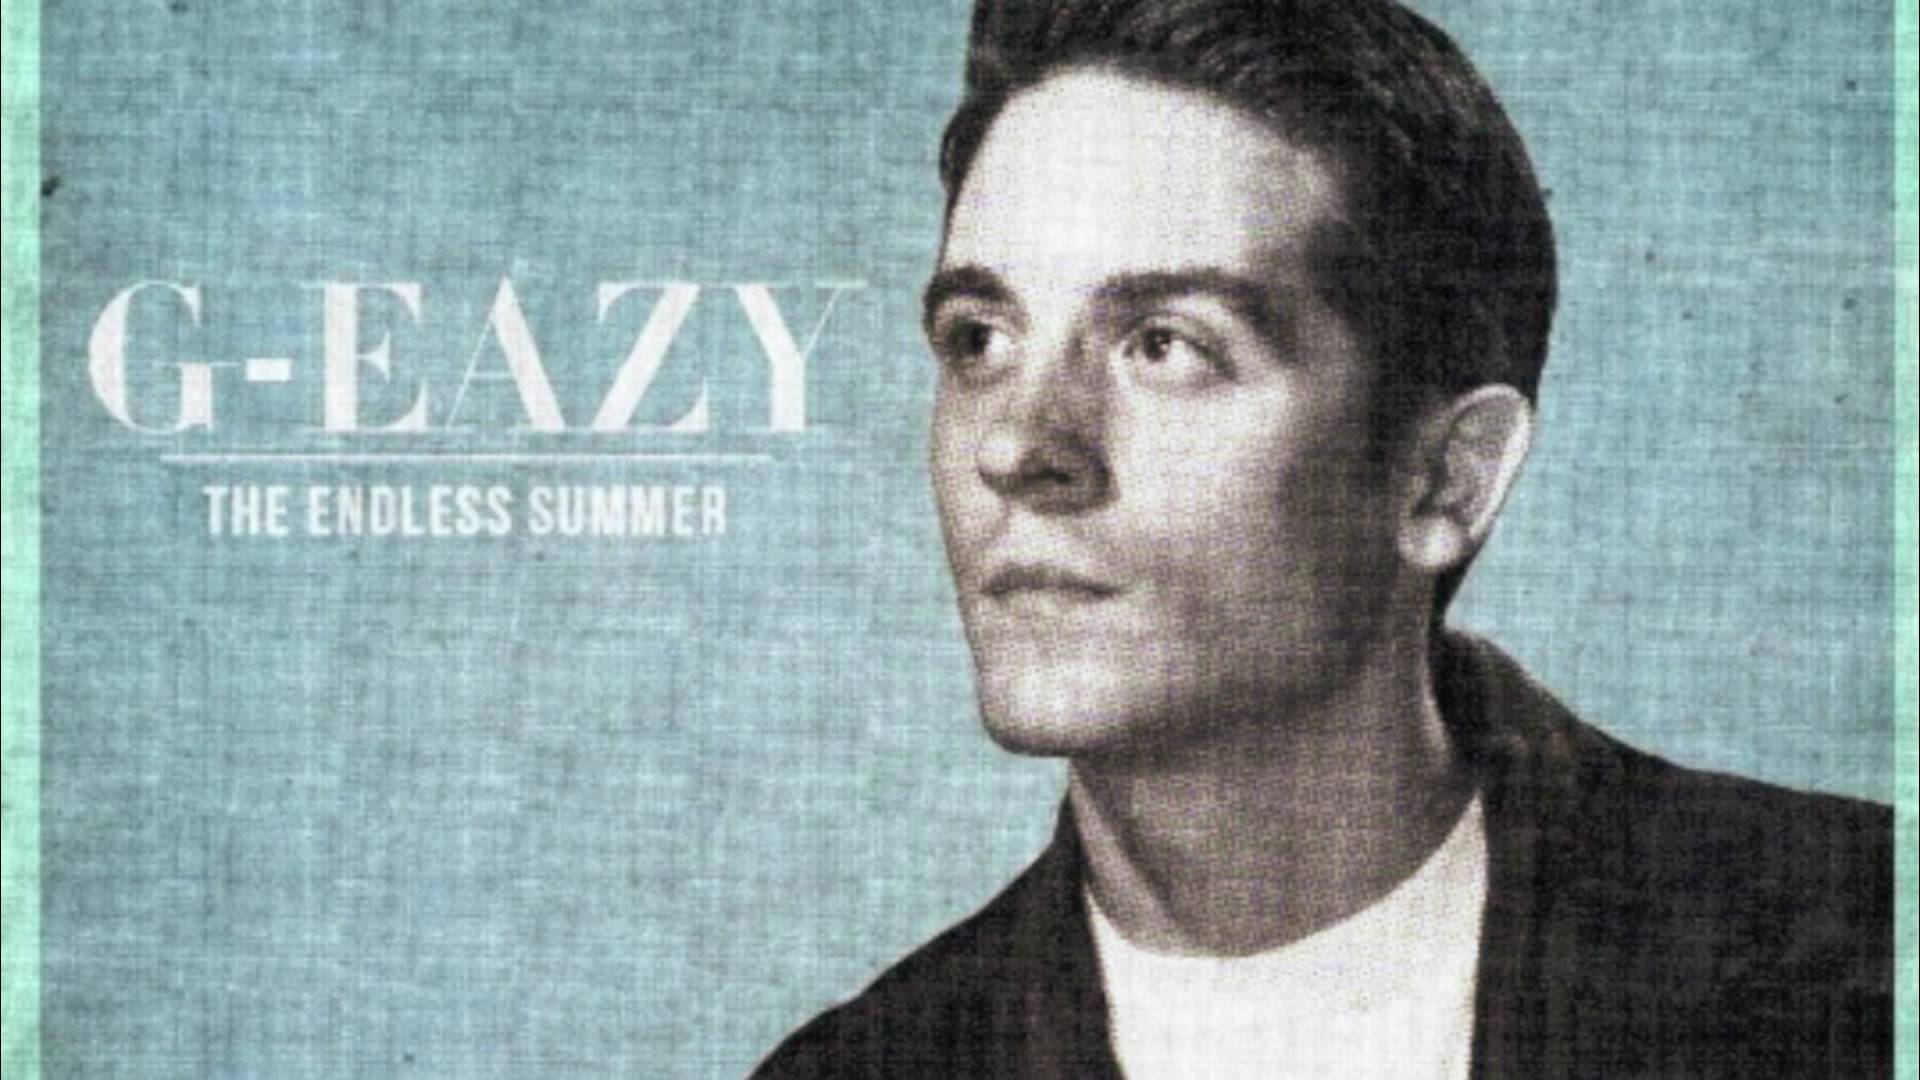 Hd Widescreen Creative G Eazy Pictures - Endless Summer G Eazy , HD Wallpaper & Backgrounds